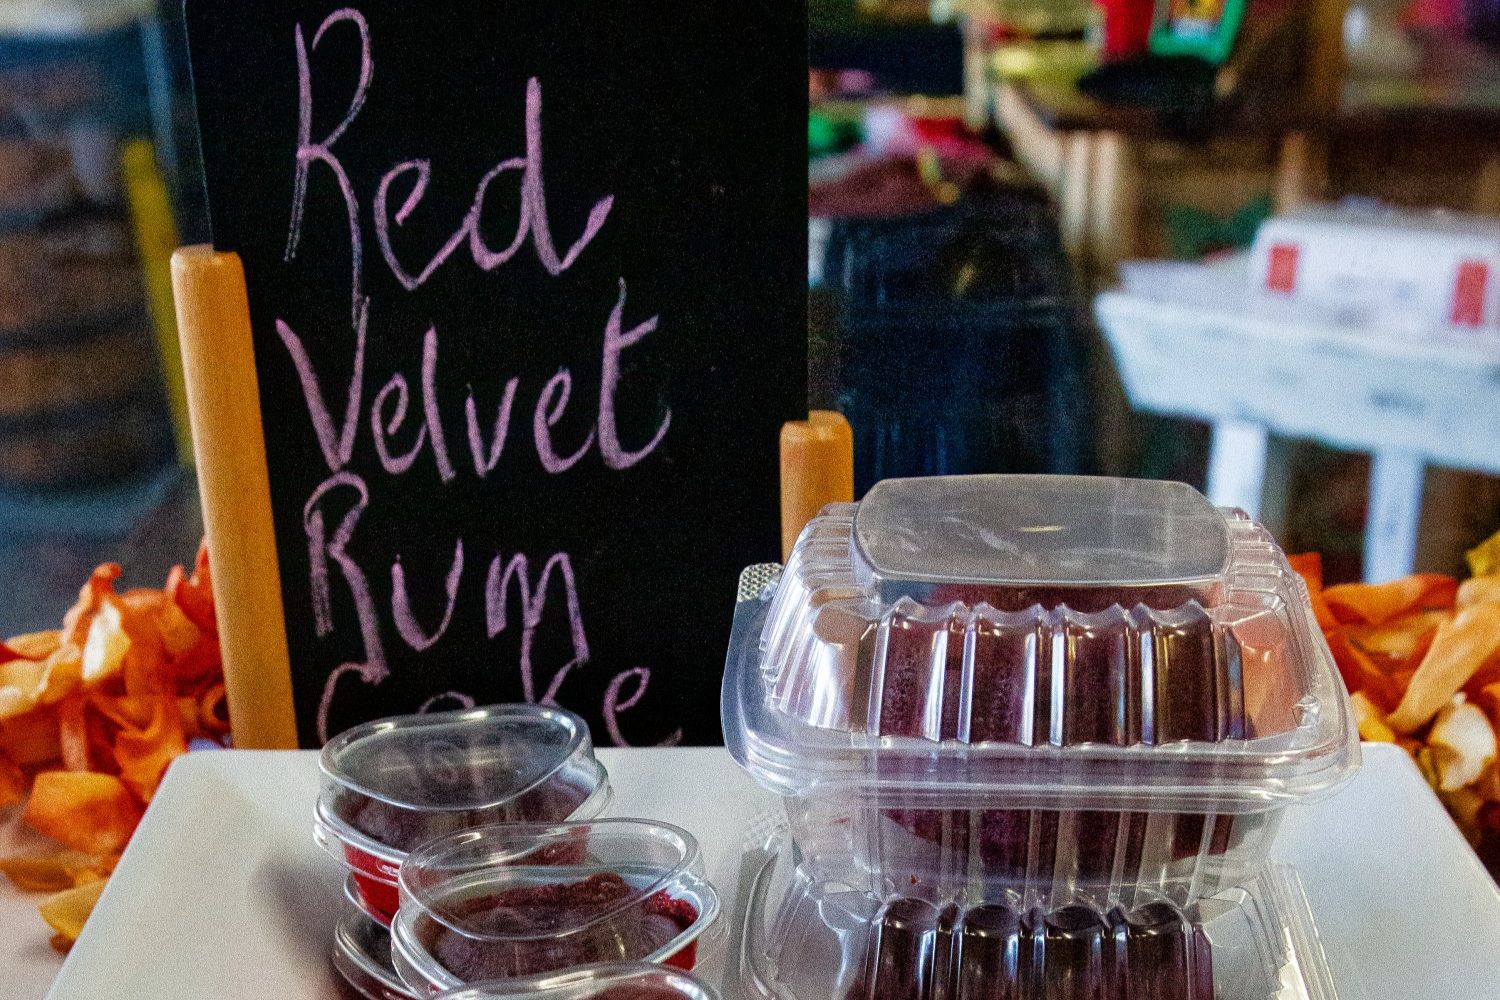 A table display featuring a sign that reads "Red Velvet Rumble" next to a container of red velvet rum cakes and small cups of red sauce.